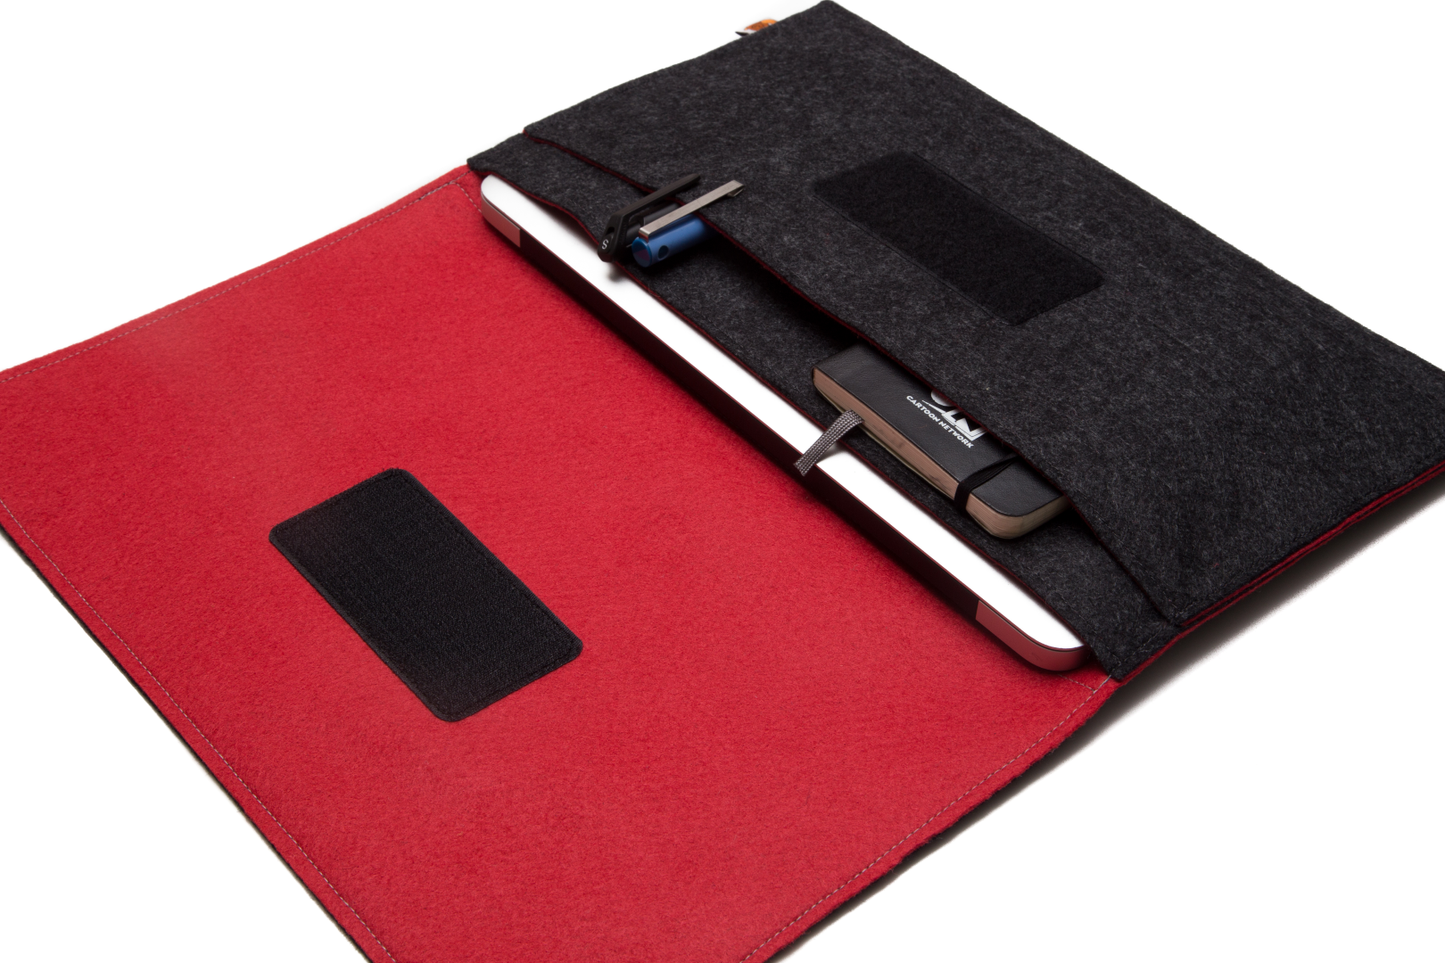 Handmade MacBook Cover with Accessories Pocket: Charcoal & Red